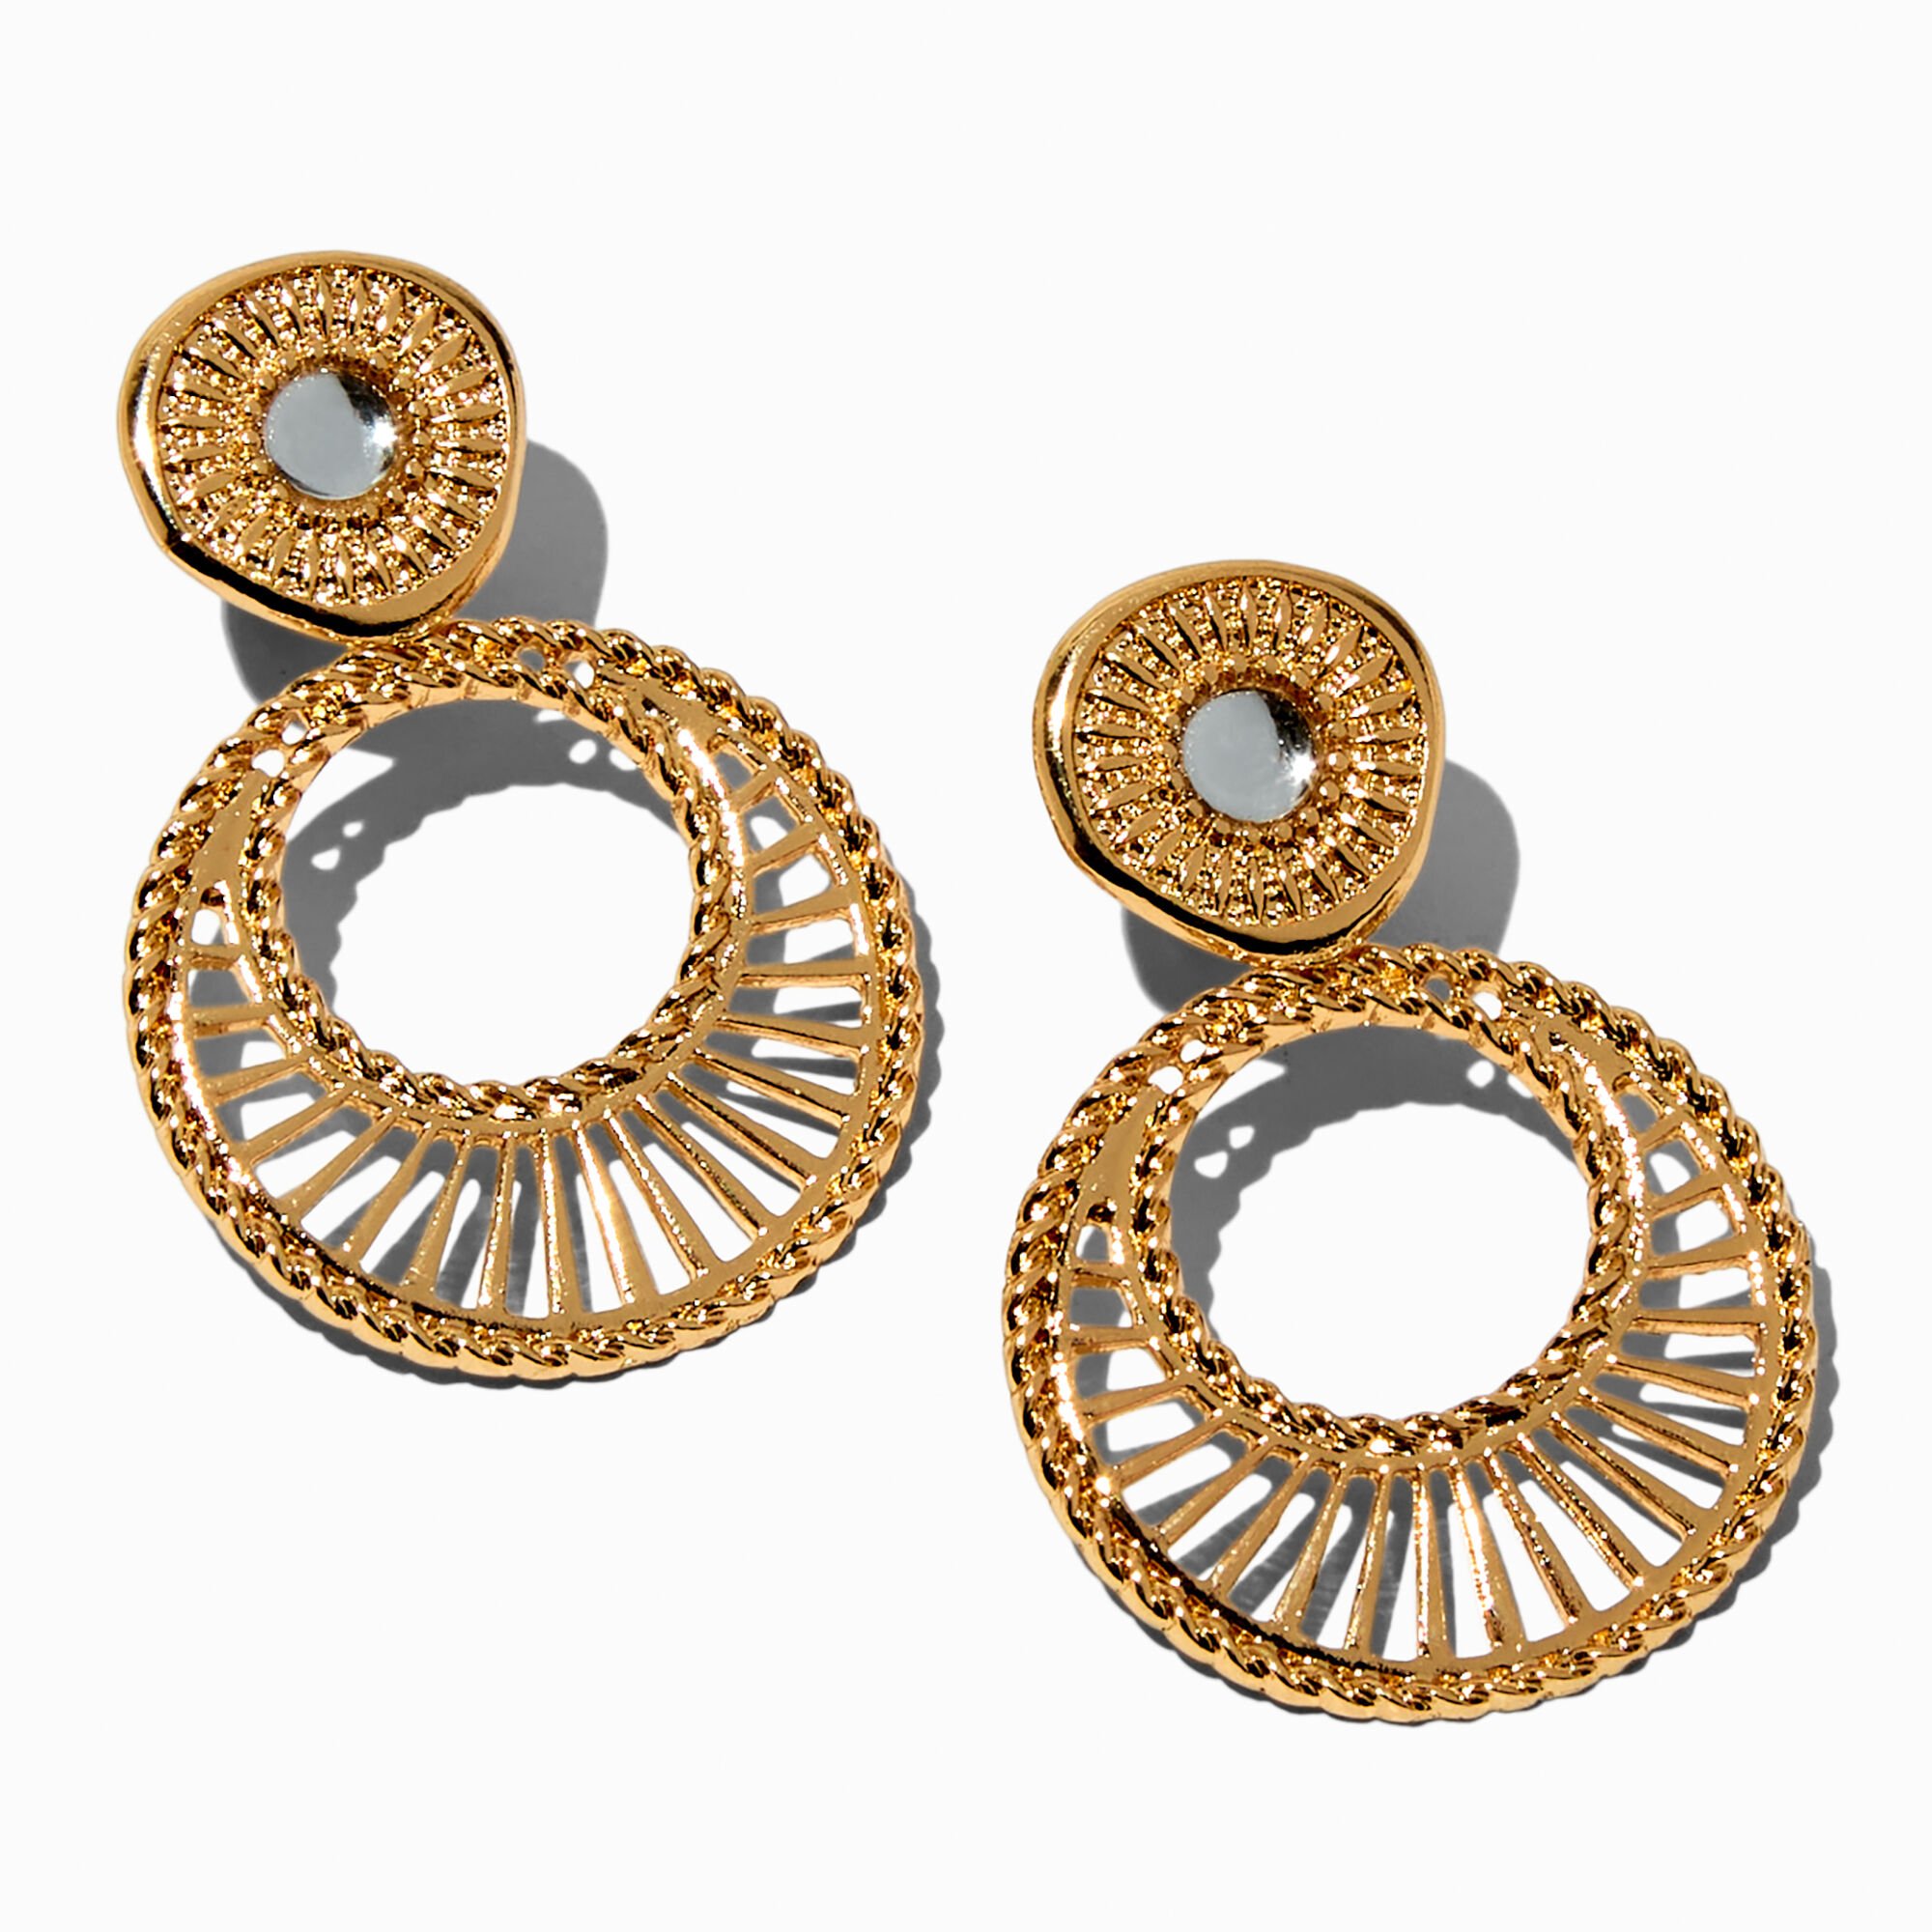 View Claires Tone Double Circle 2 ClipOn Drop Earrings Gold information